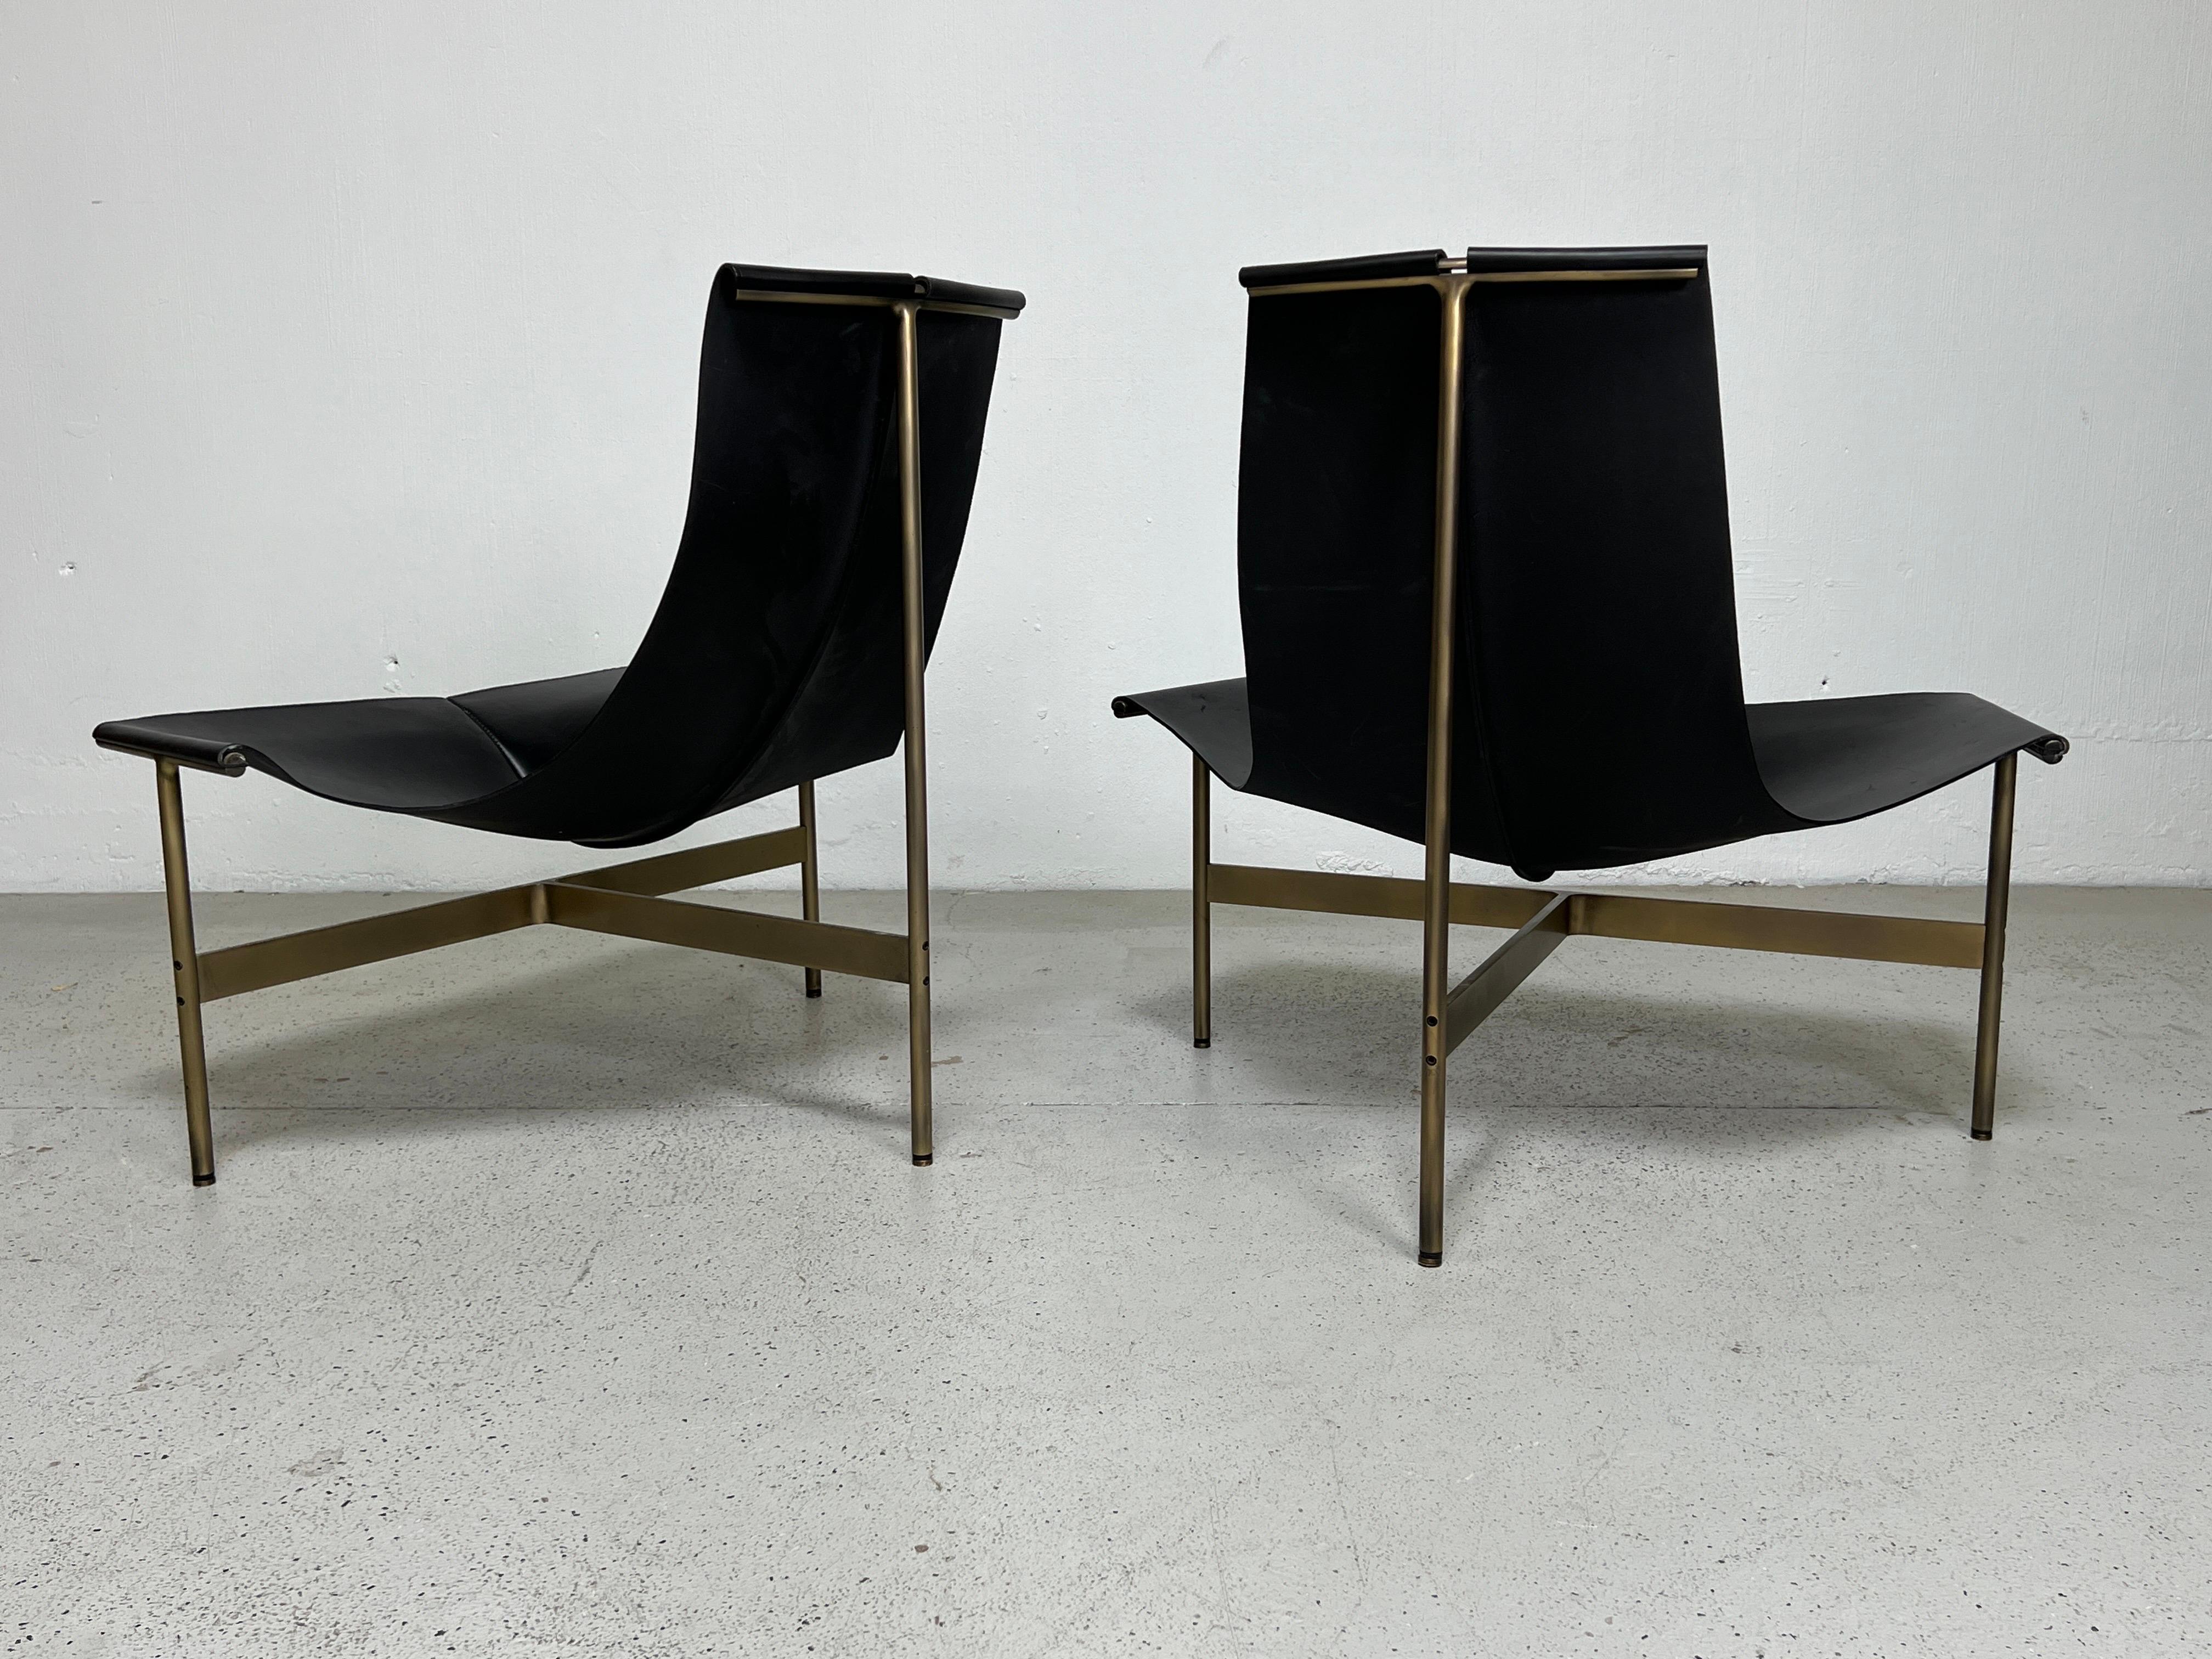 Pair of Bronze TG-15 Lounge Chair by Katavolos, Littell, & Kelley For Sale 7